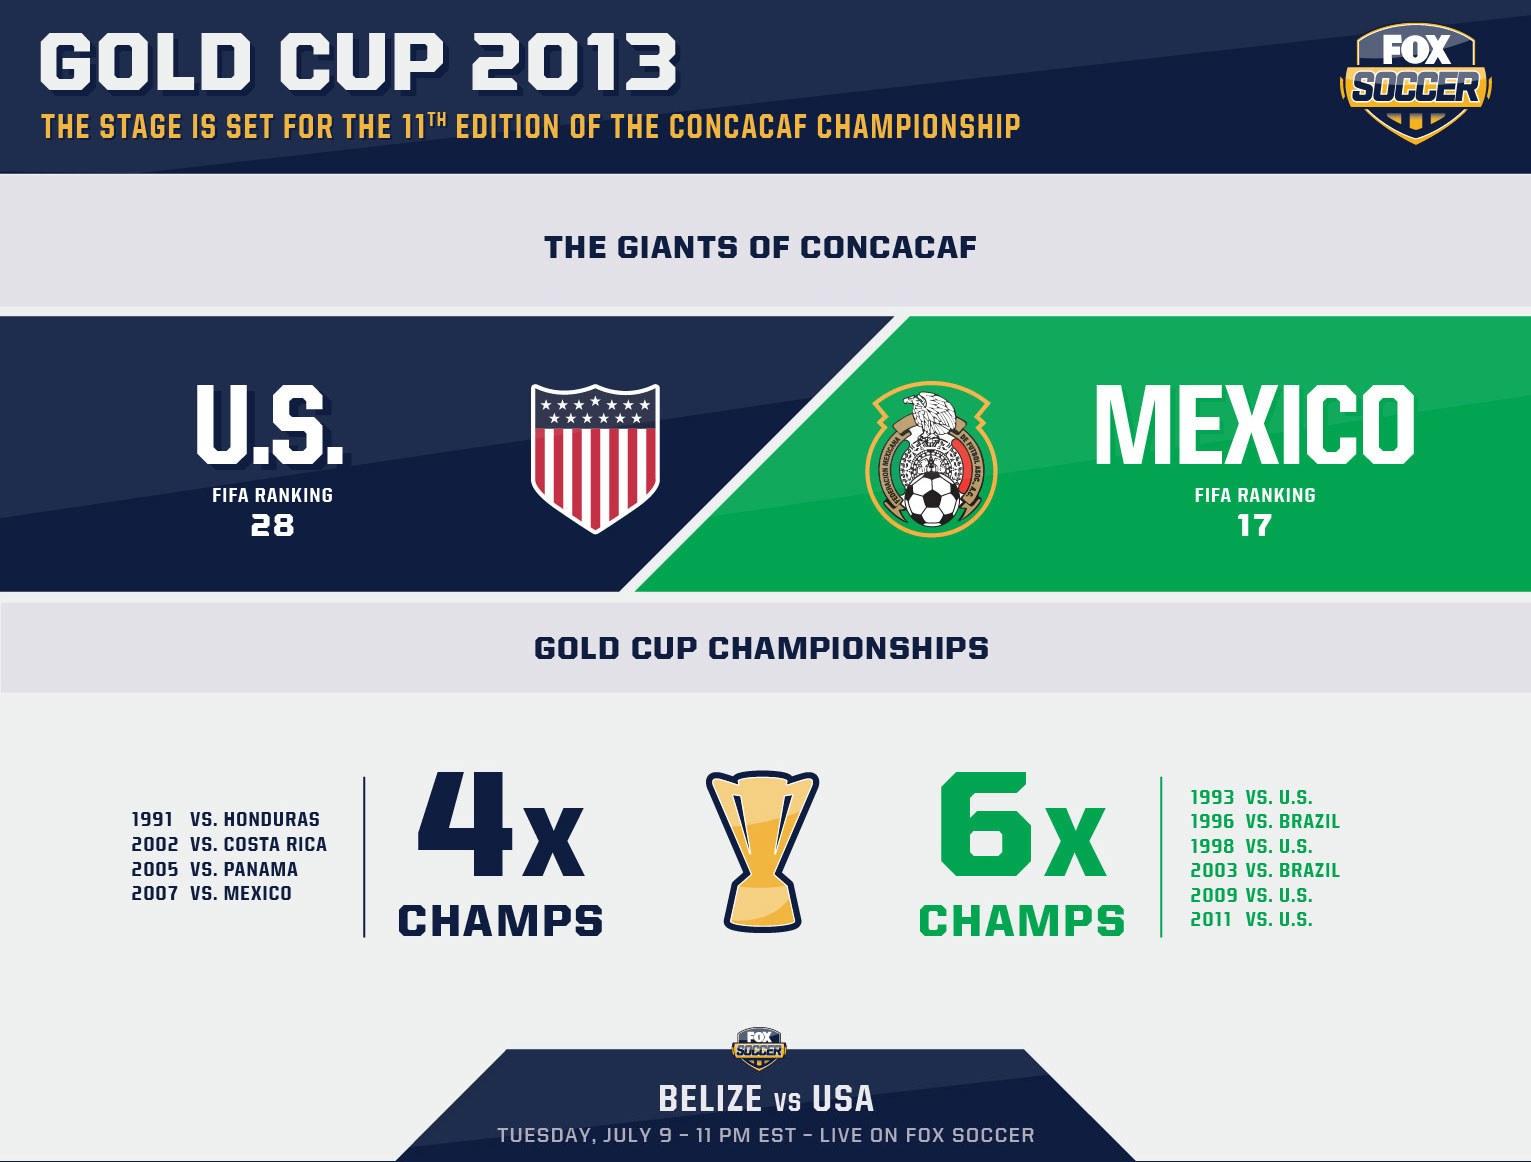 Infographic showing the 2013 Gold Cup semifinal match between the U.S. and Mexico, with their FIFA rankings (U.S. 28 and Mexico 17). It also highlights the number of Gold Cup championships won: U.S. (4) and Mexico (6). The text lists previous winners and promotes the match.